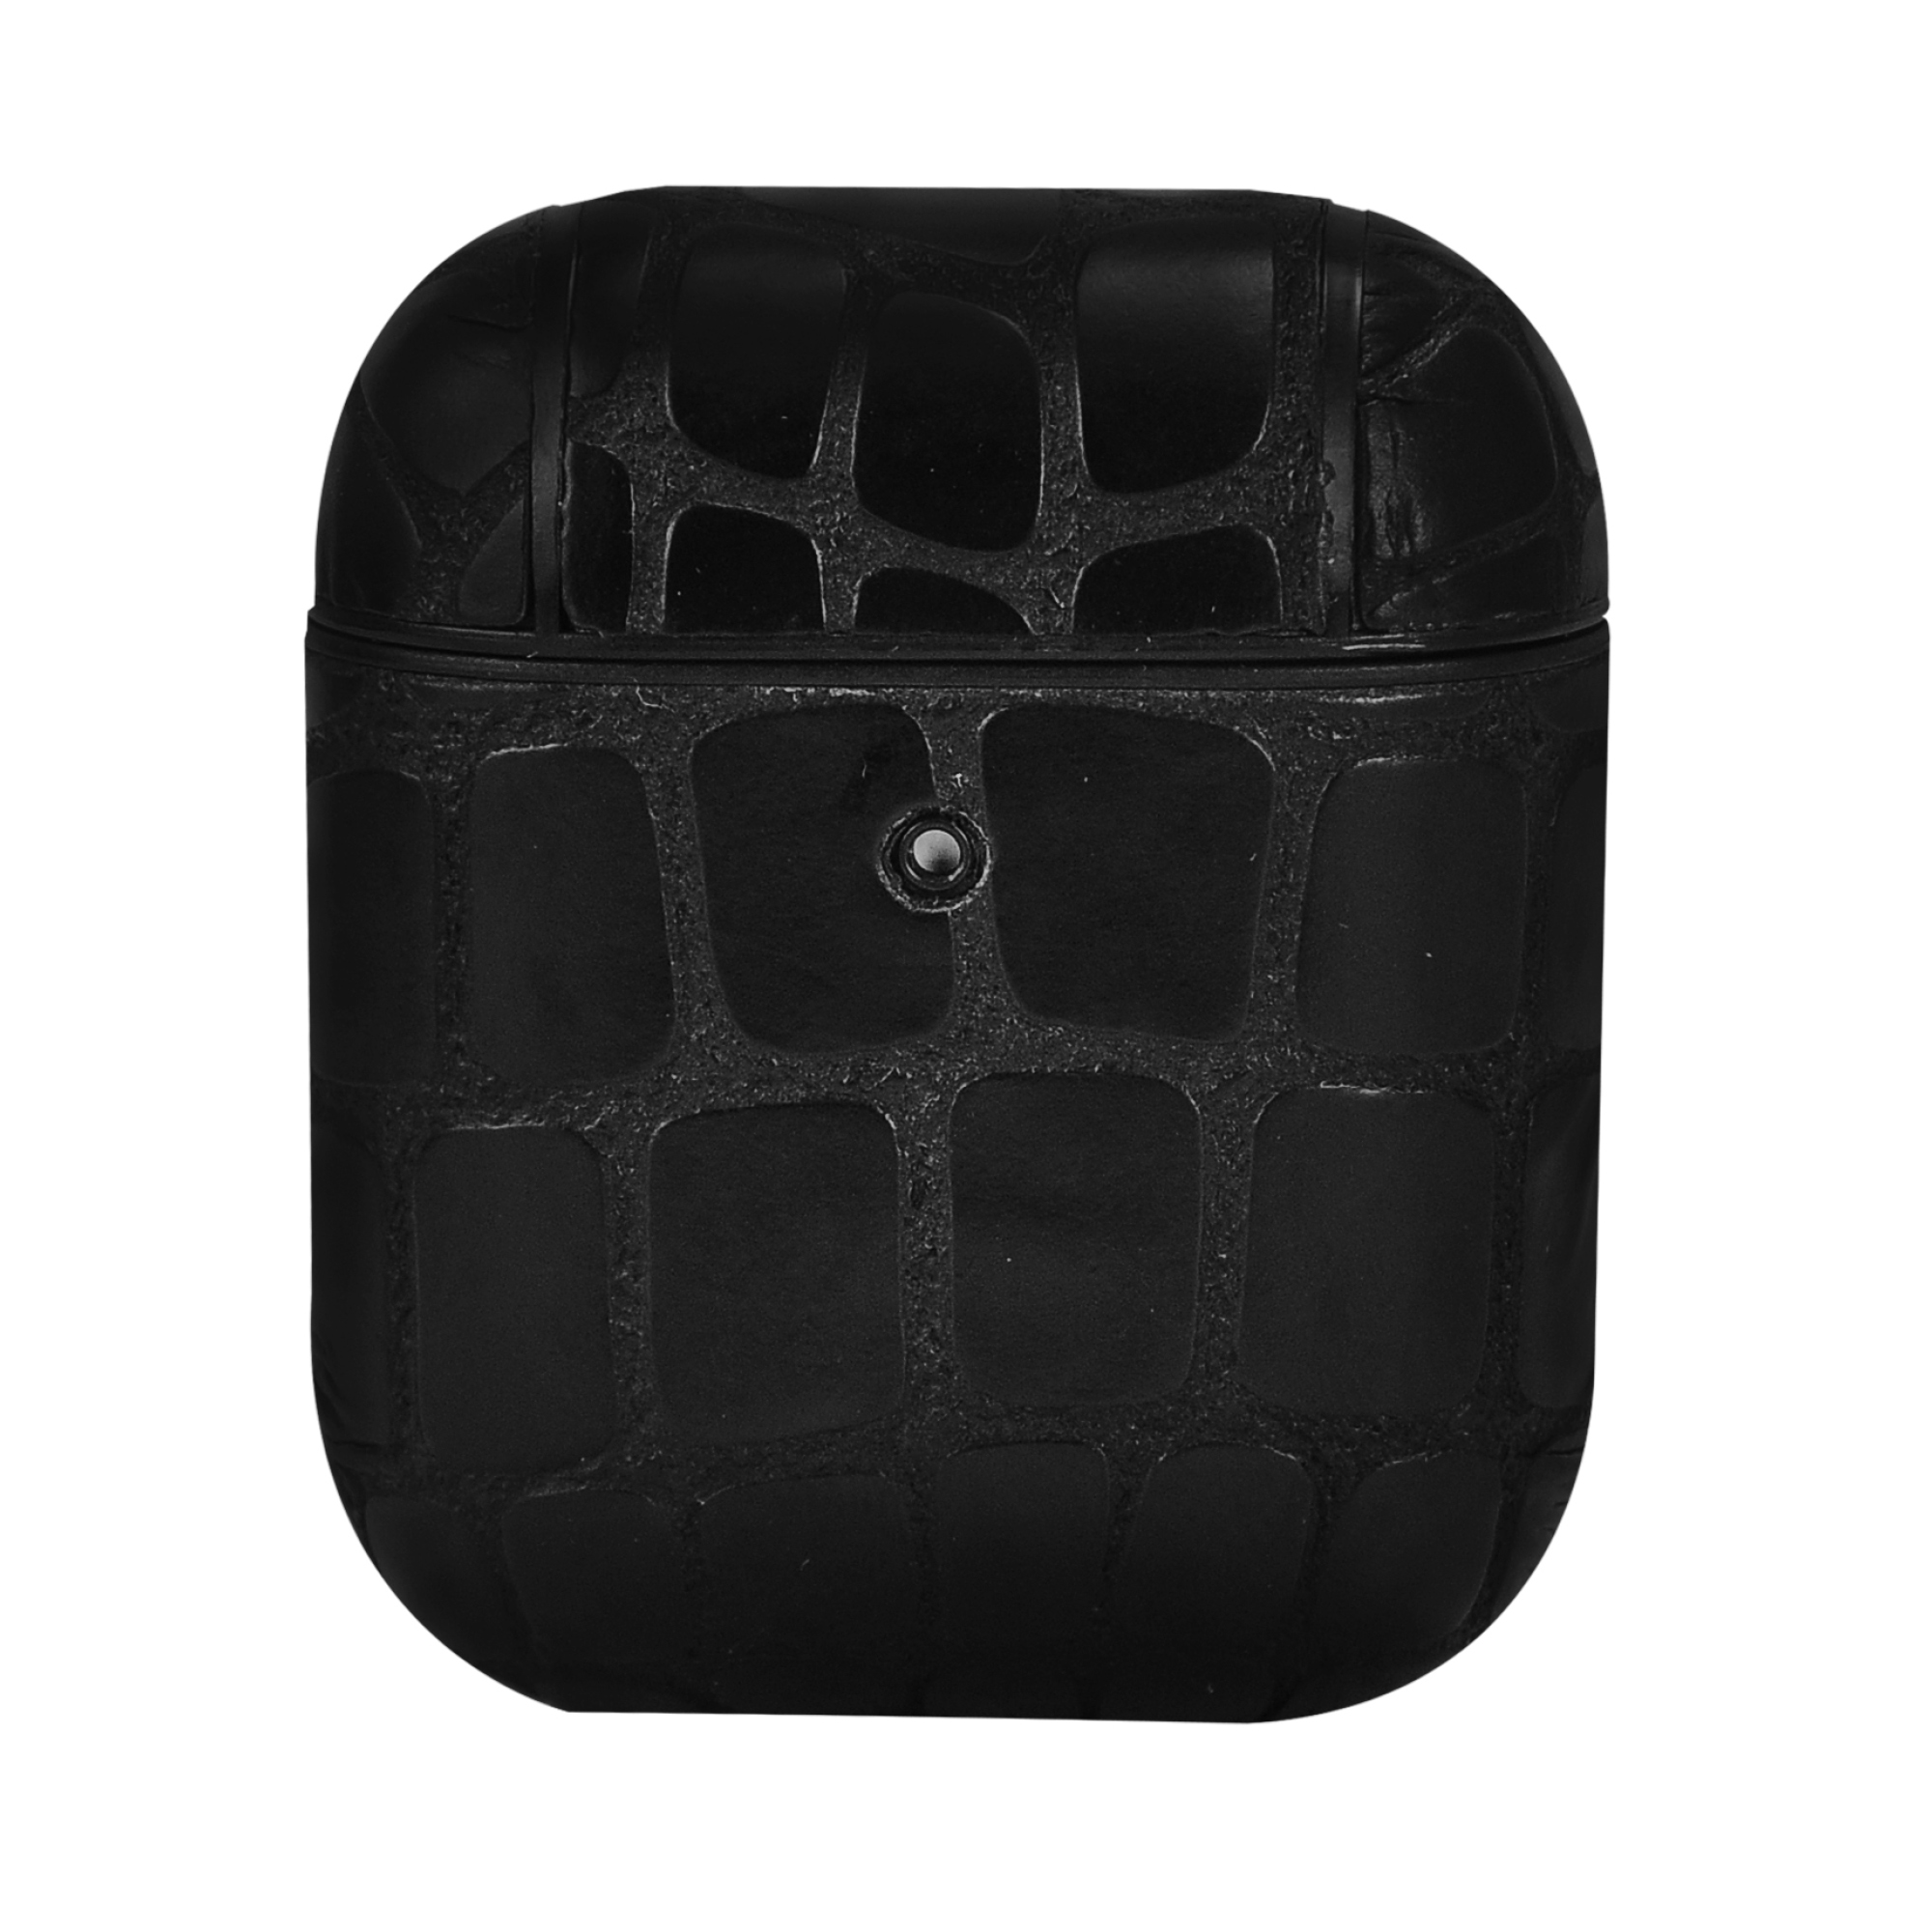 TERRATEC AirPods Case AirBox Stone Pattern Black